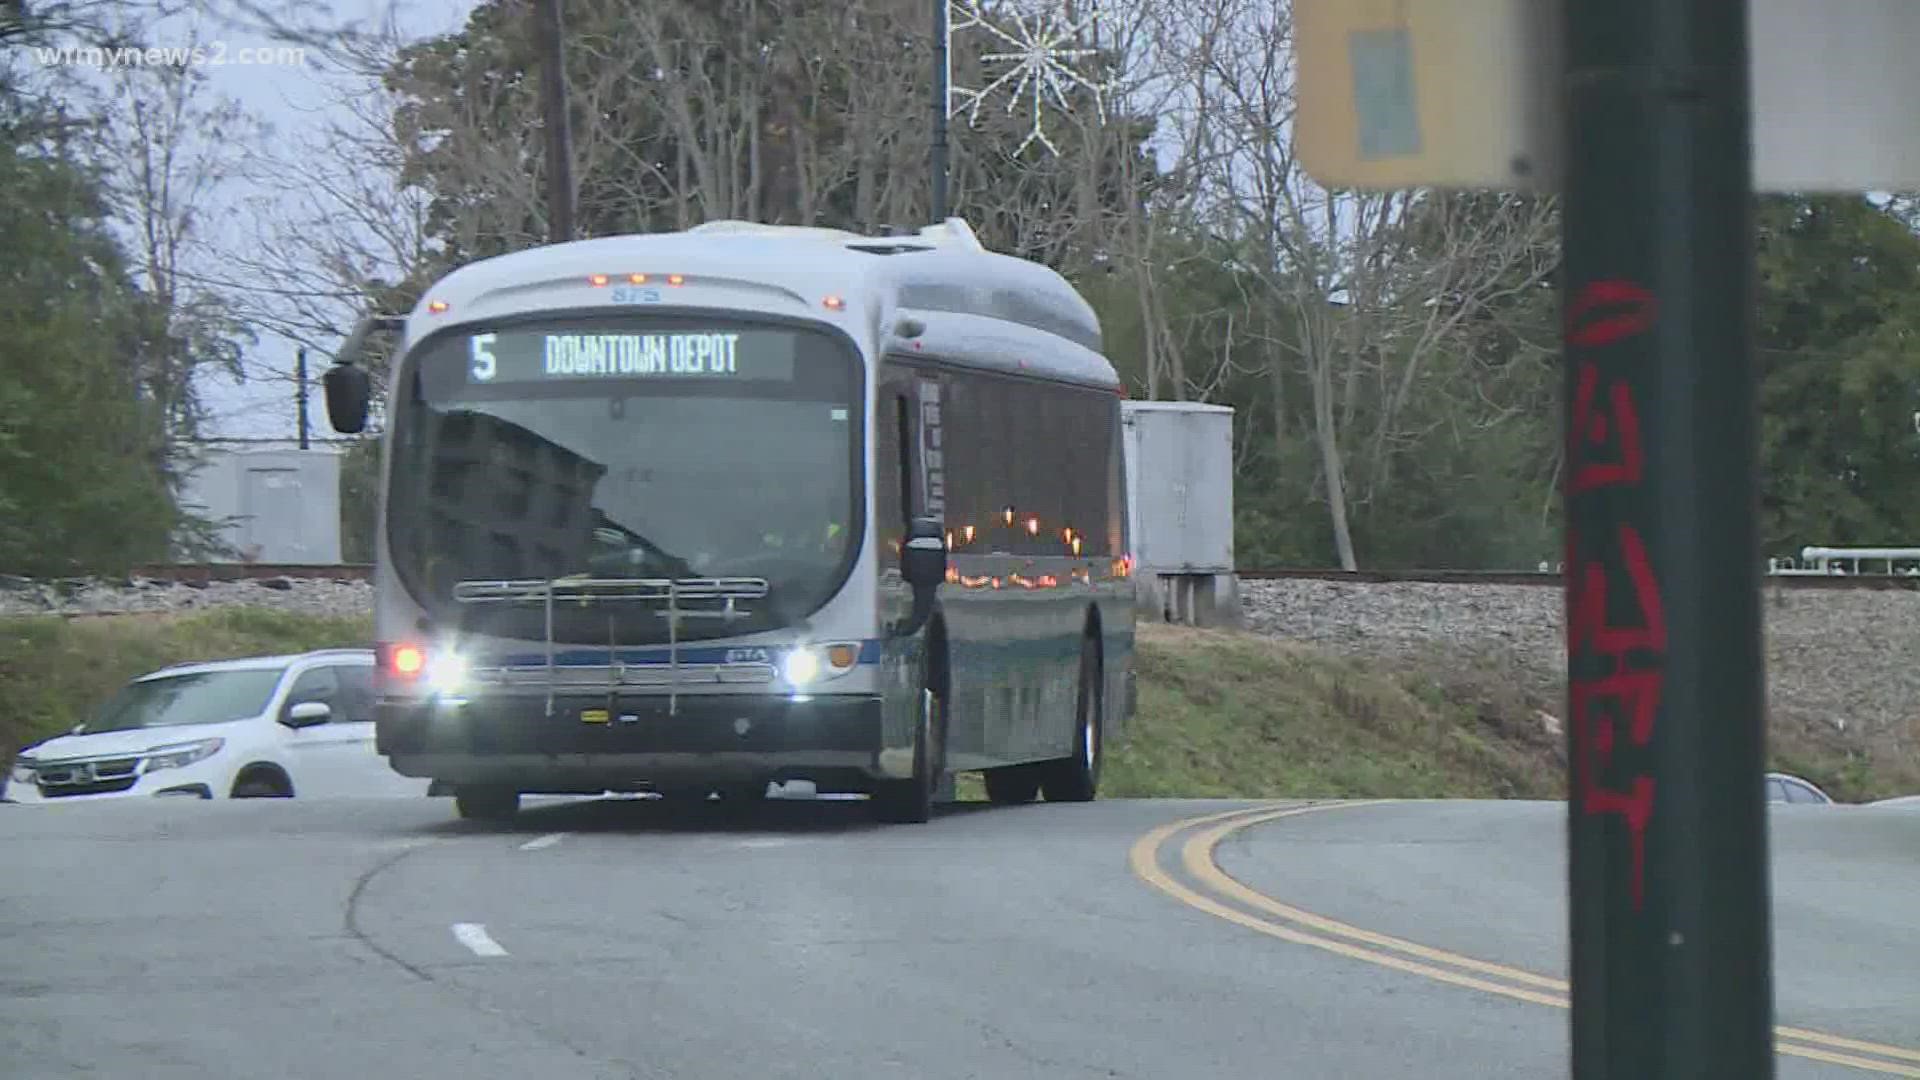 High school students in High Point and Greensboro will get access to public transportation, as Guilford County Schools deals with a bus driver shortage.